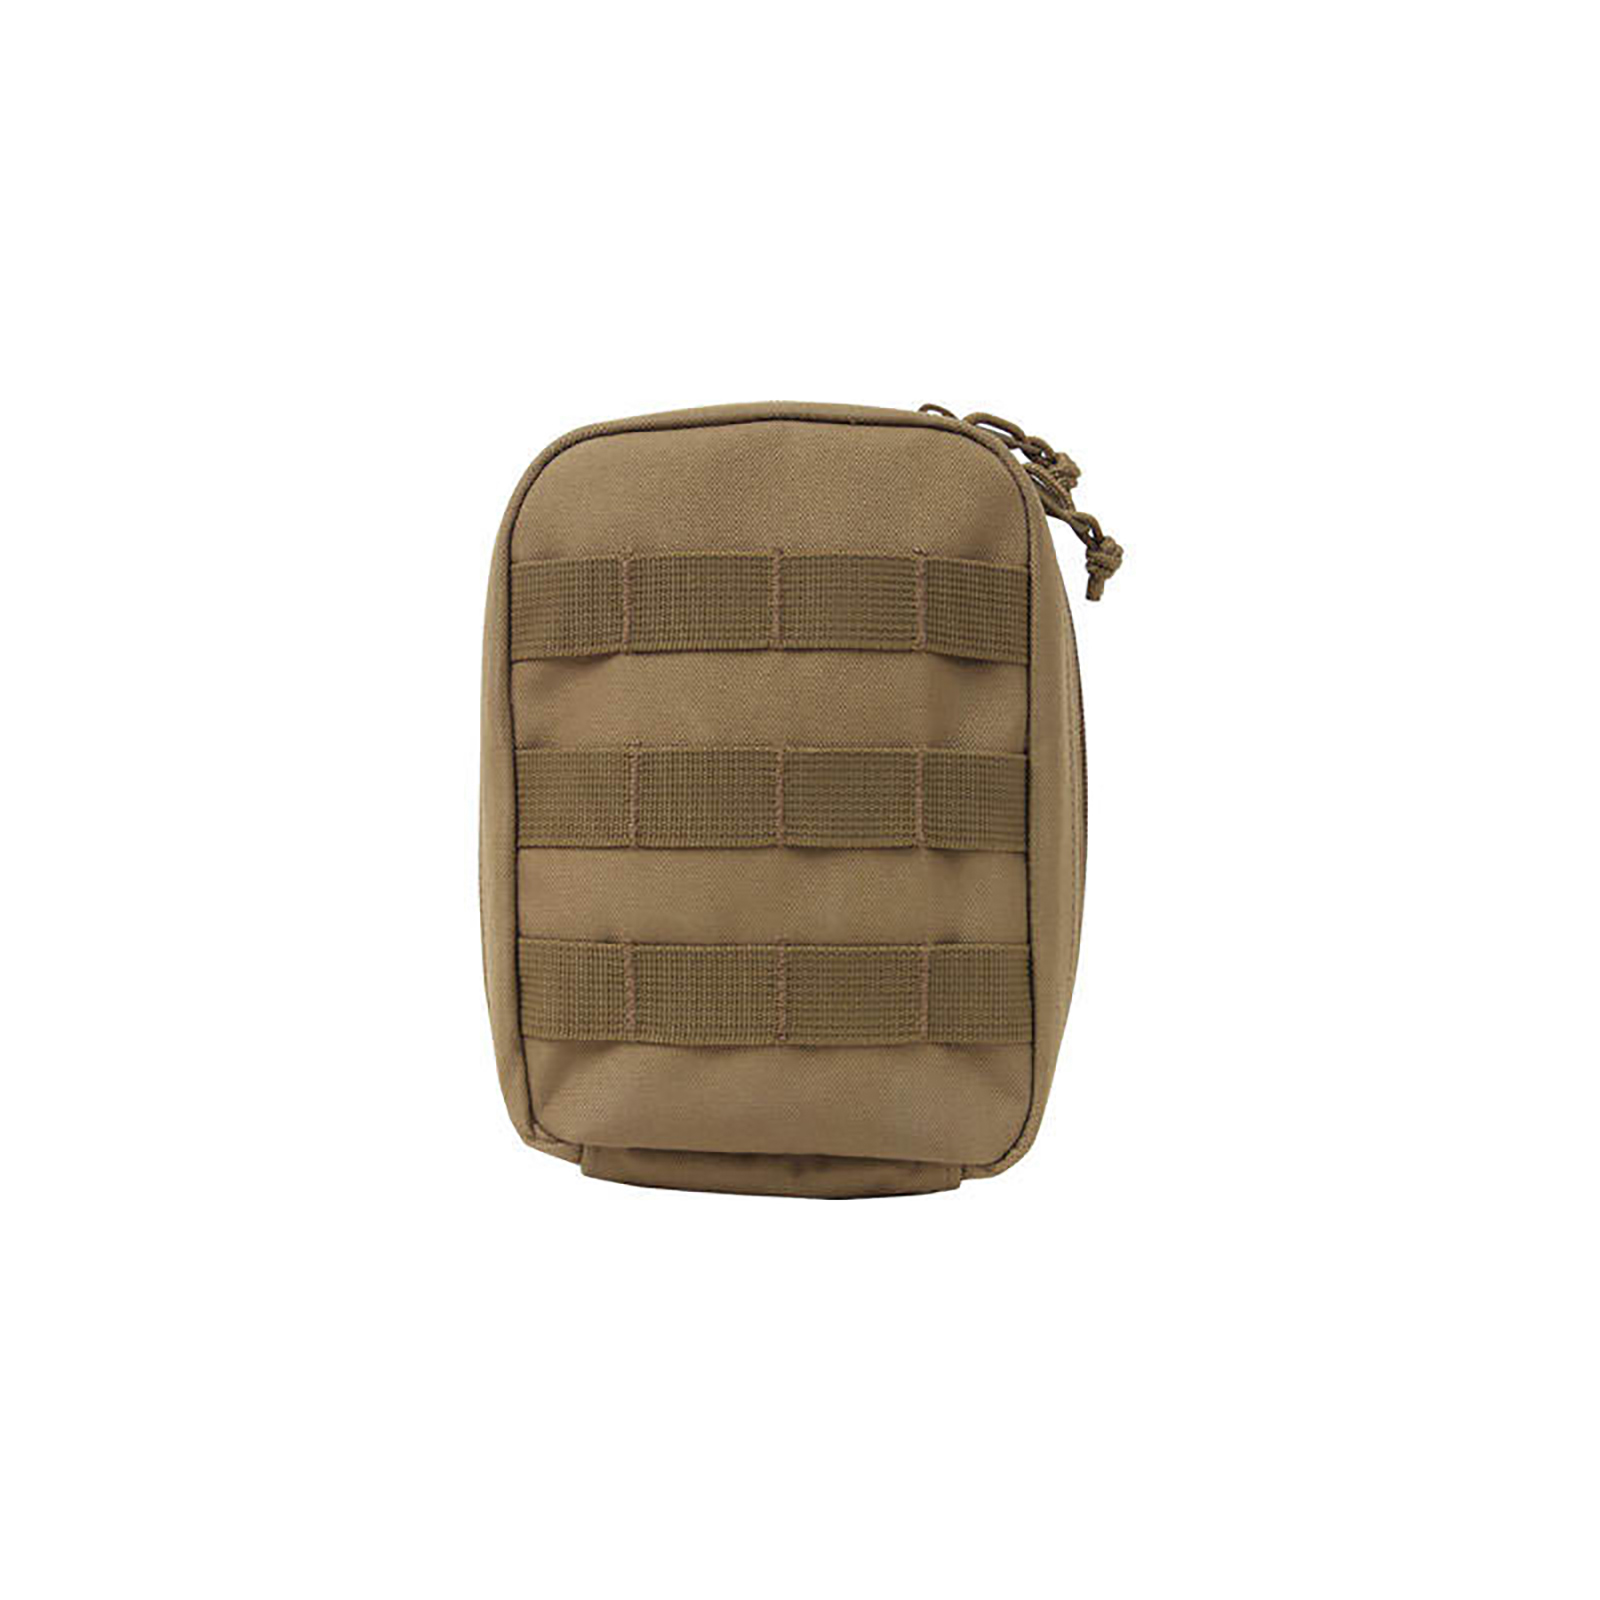 Rothco MOLLE Tactical Trauma and First Aid Kit Pouch - Coyote Brown